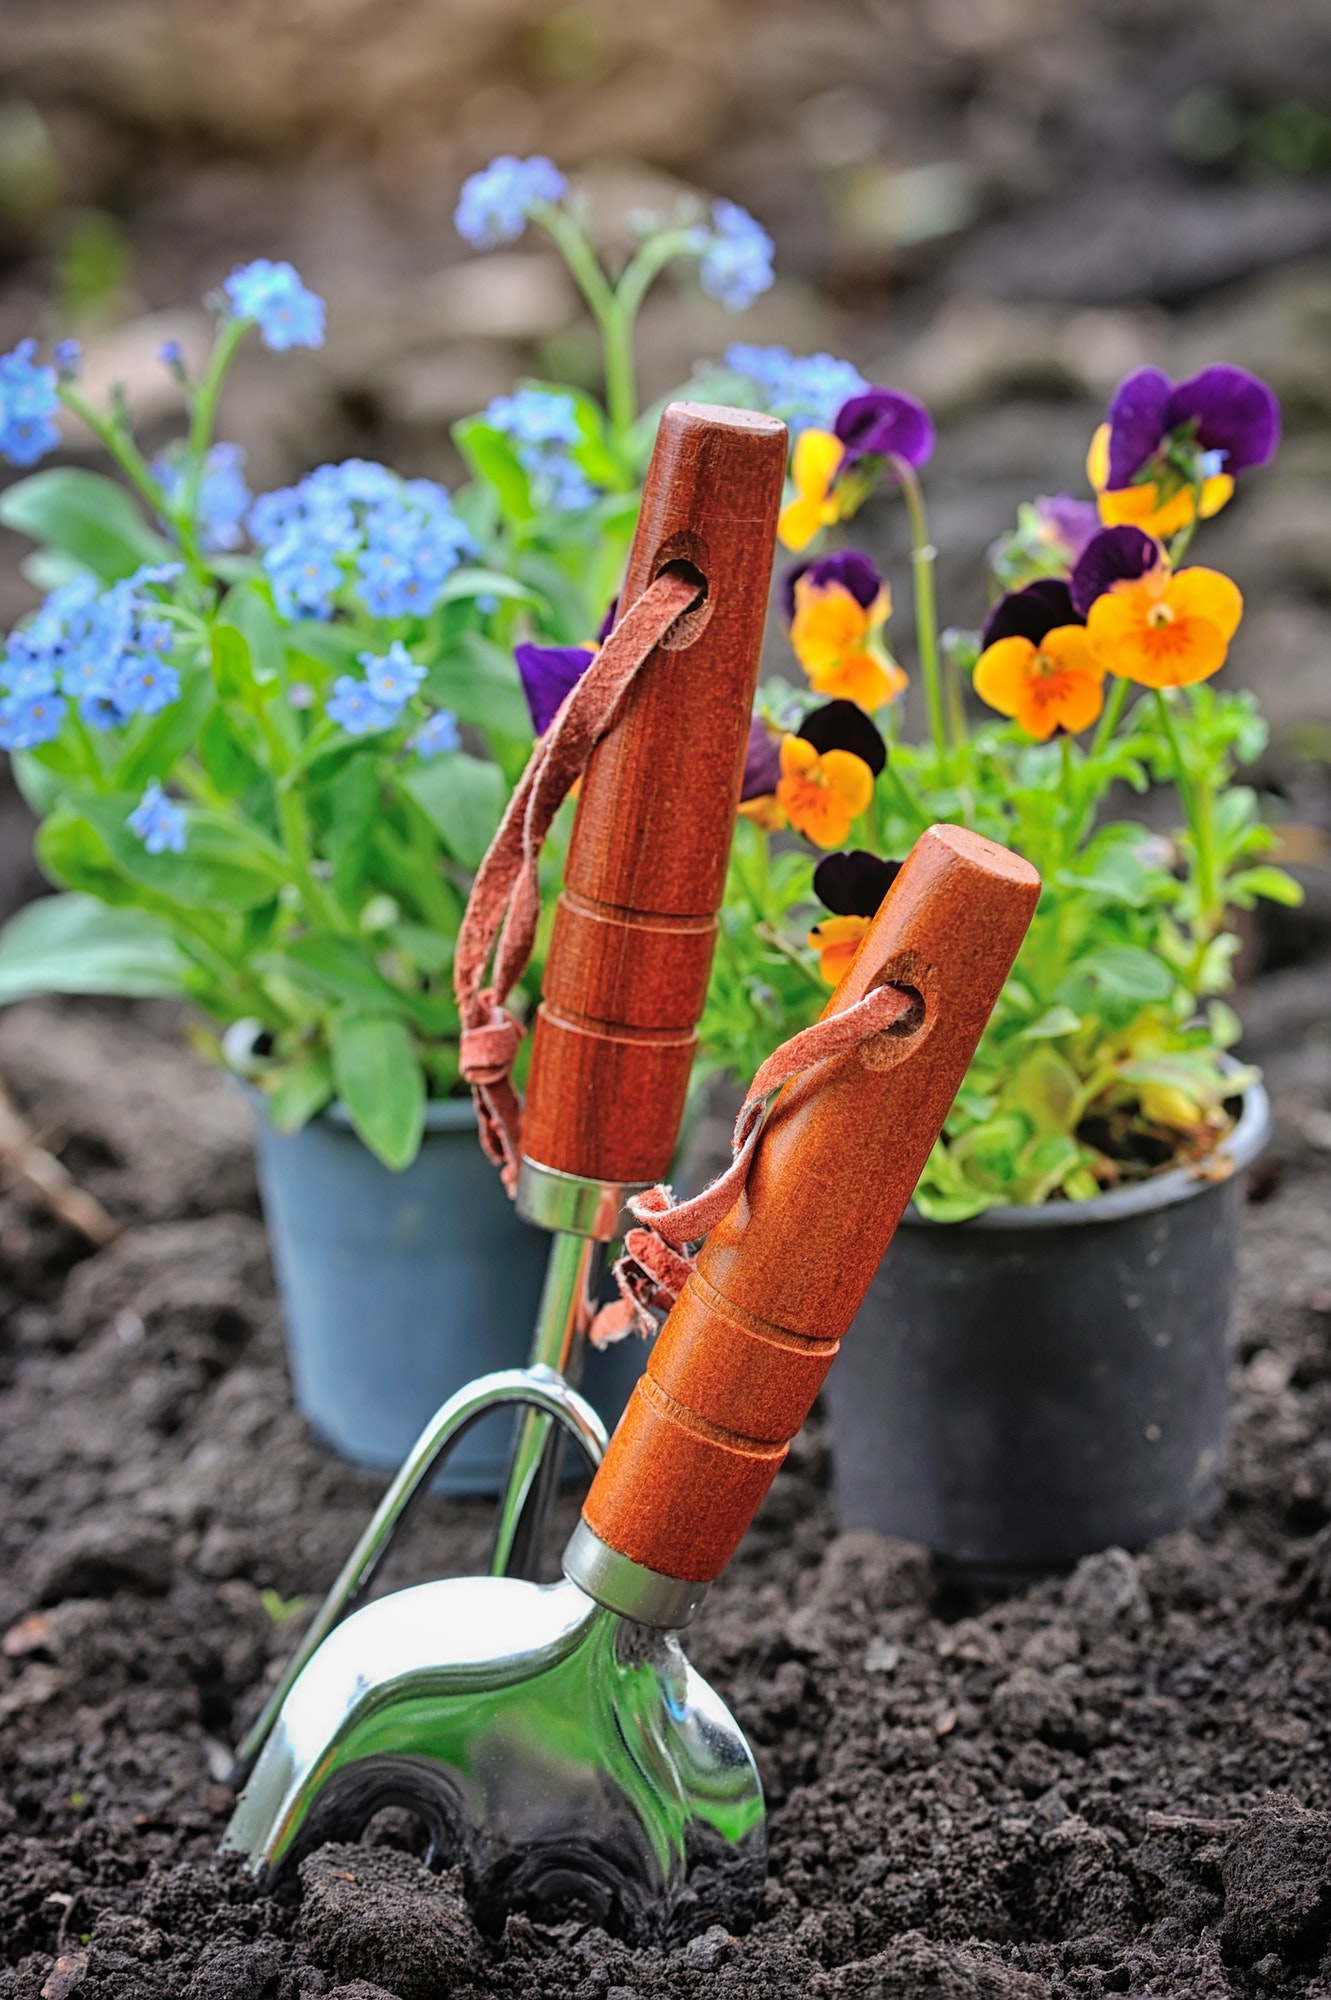 gardening-tools-and-spring-flowers-in-the-garden.jpg